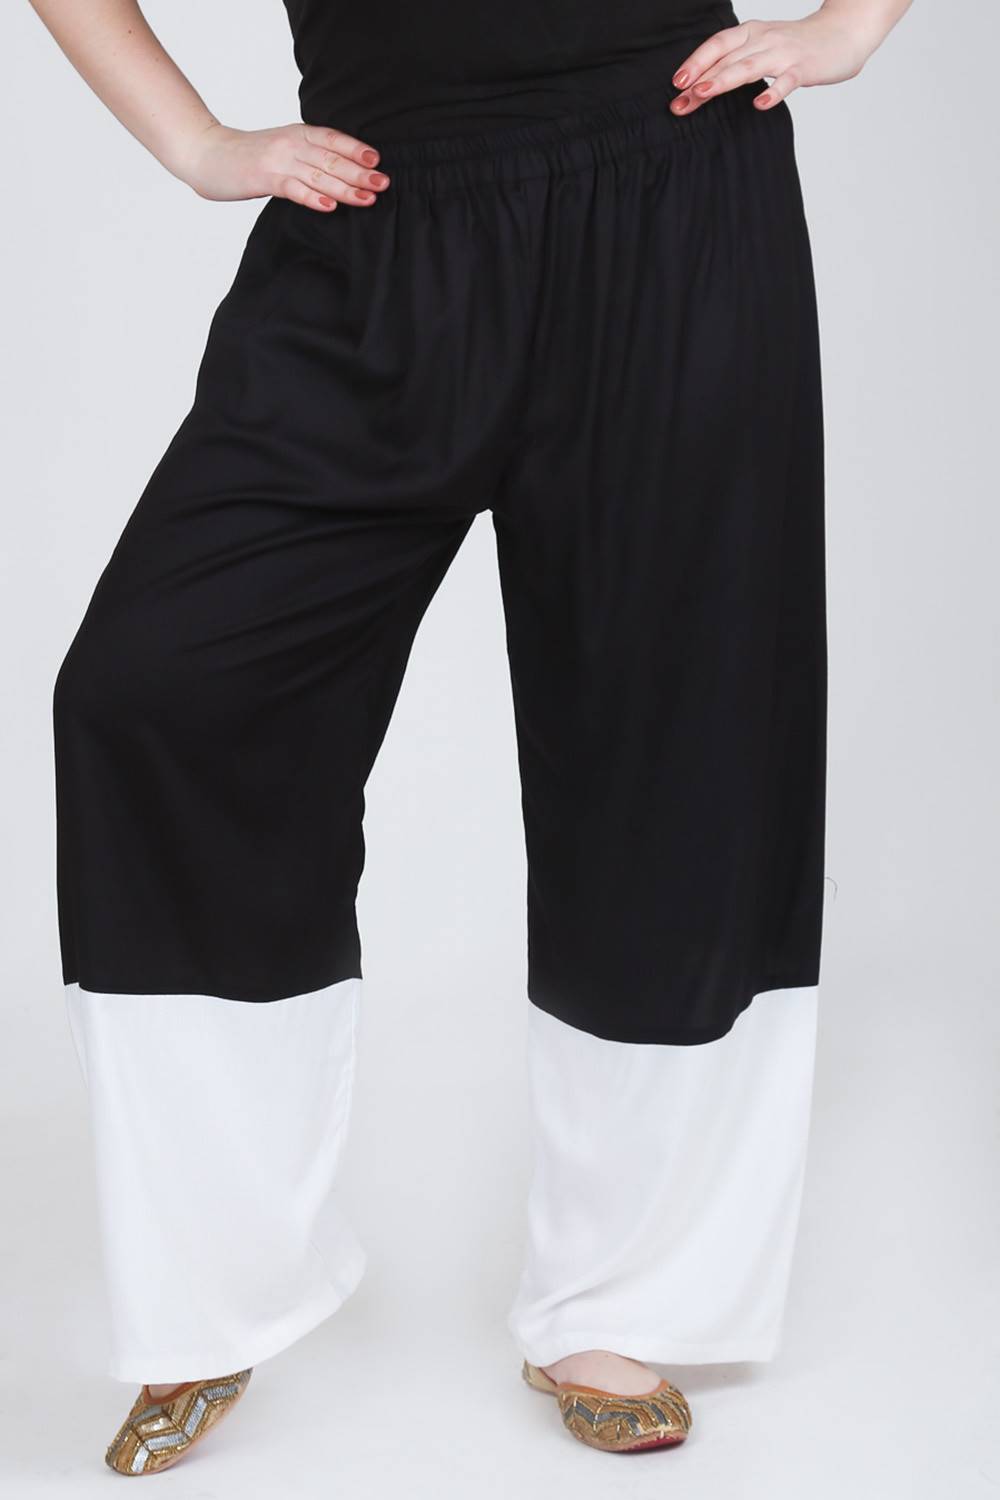 72 Wholesale Women's Solid Color Palazzo Pants - at - wholesalesockdeals.com